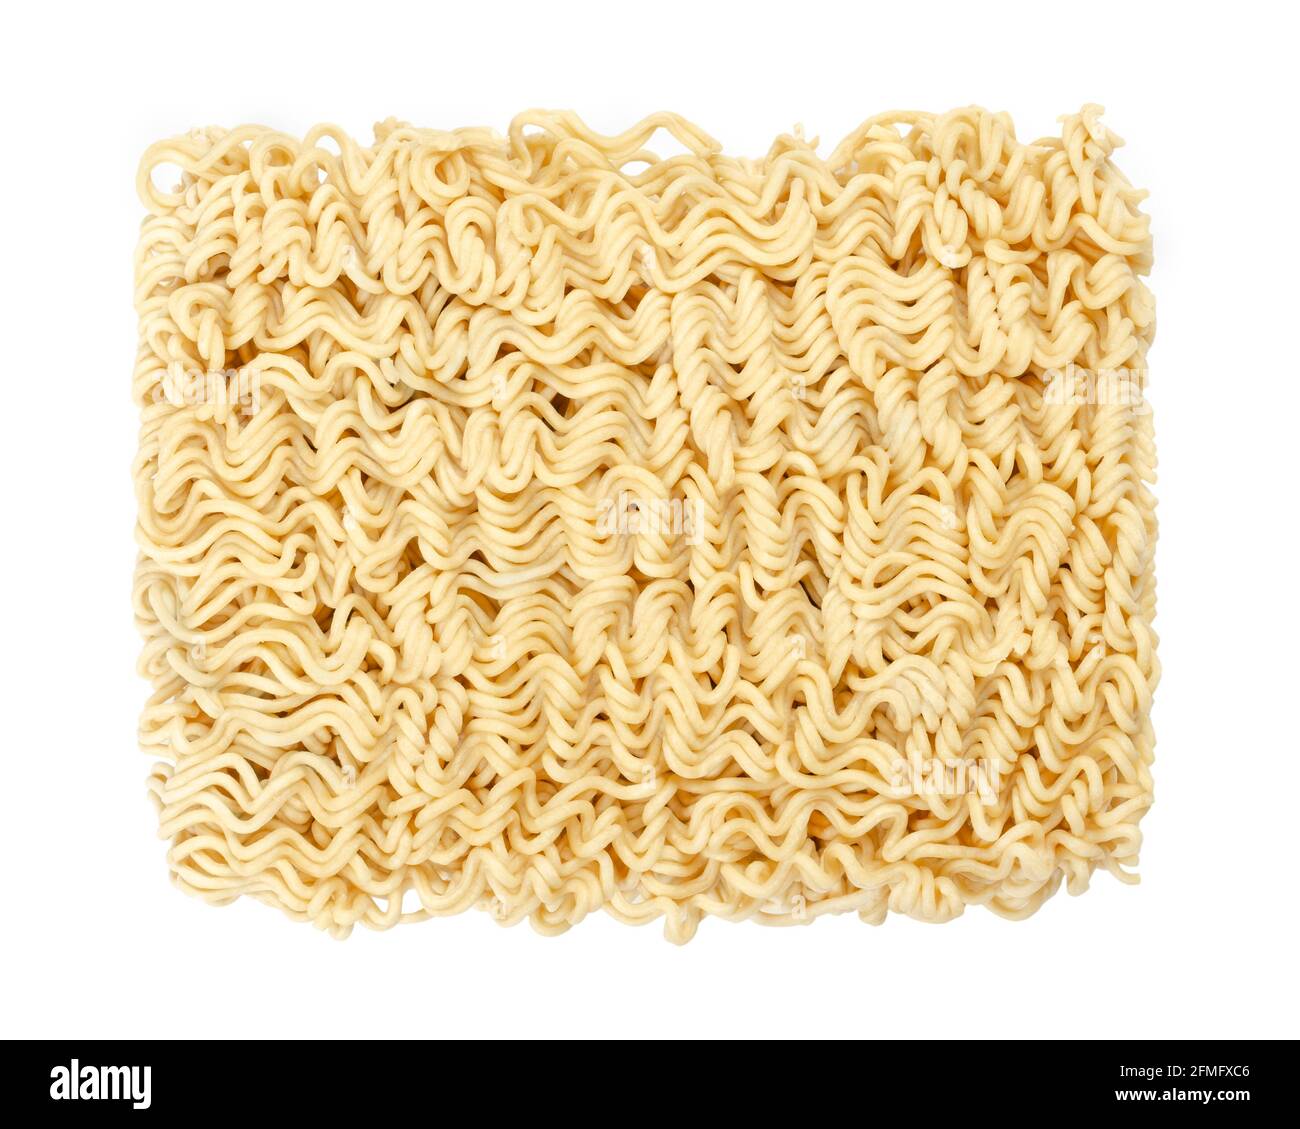 Dried instant noodle block, from above. Instant ramen are noodles sold in precooked and dried block form,  to be soaked in boiling water. Stock Photo